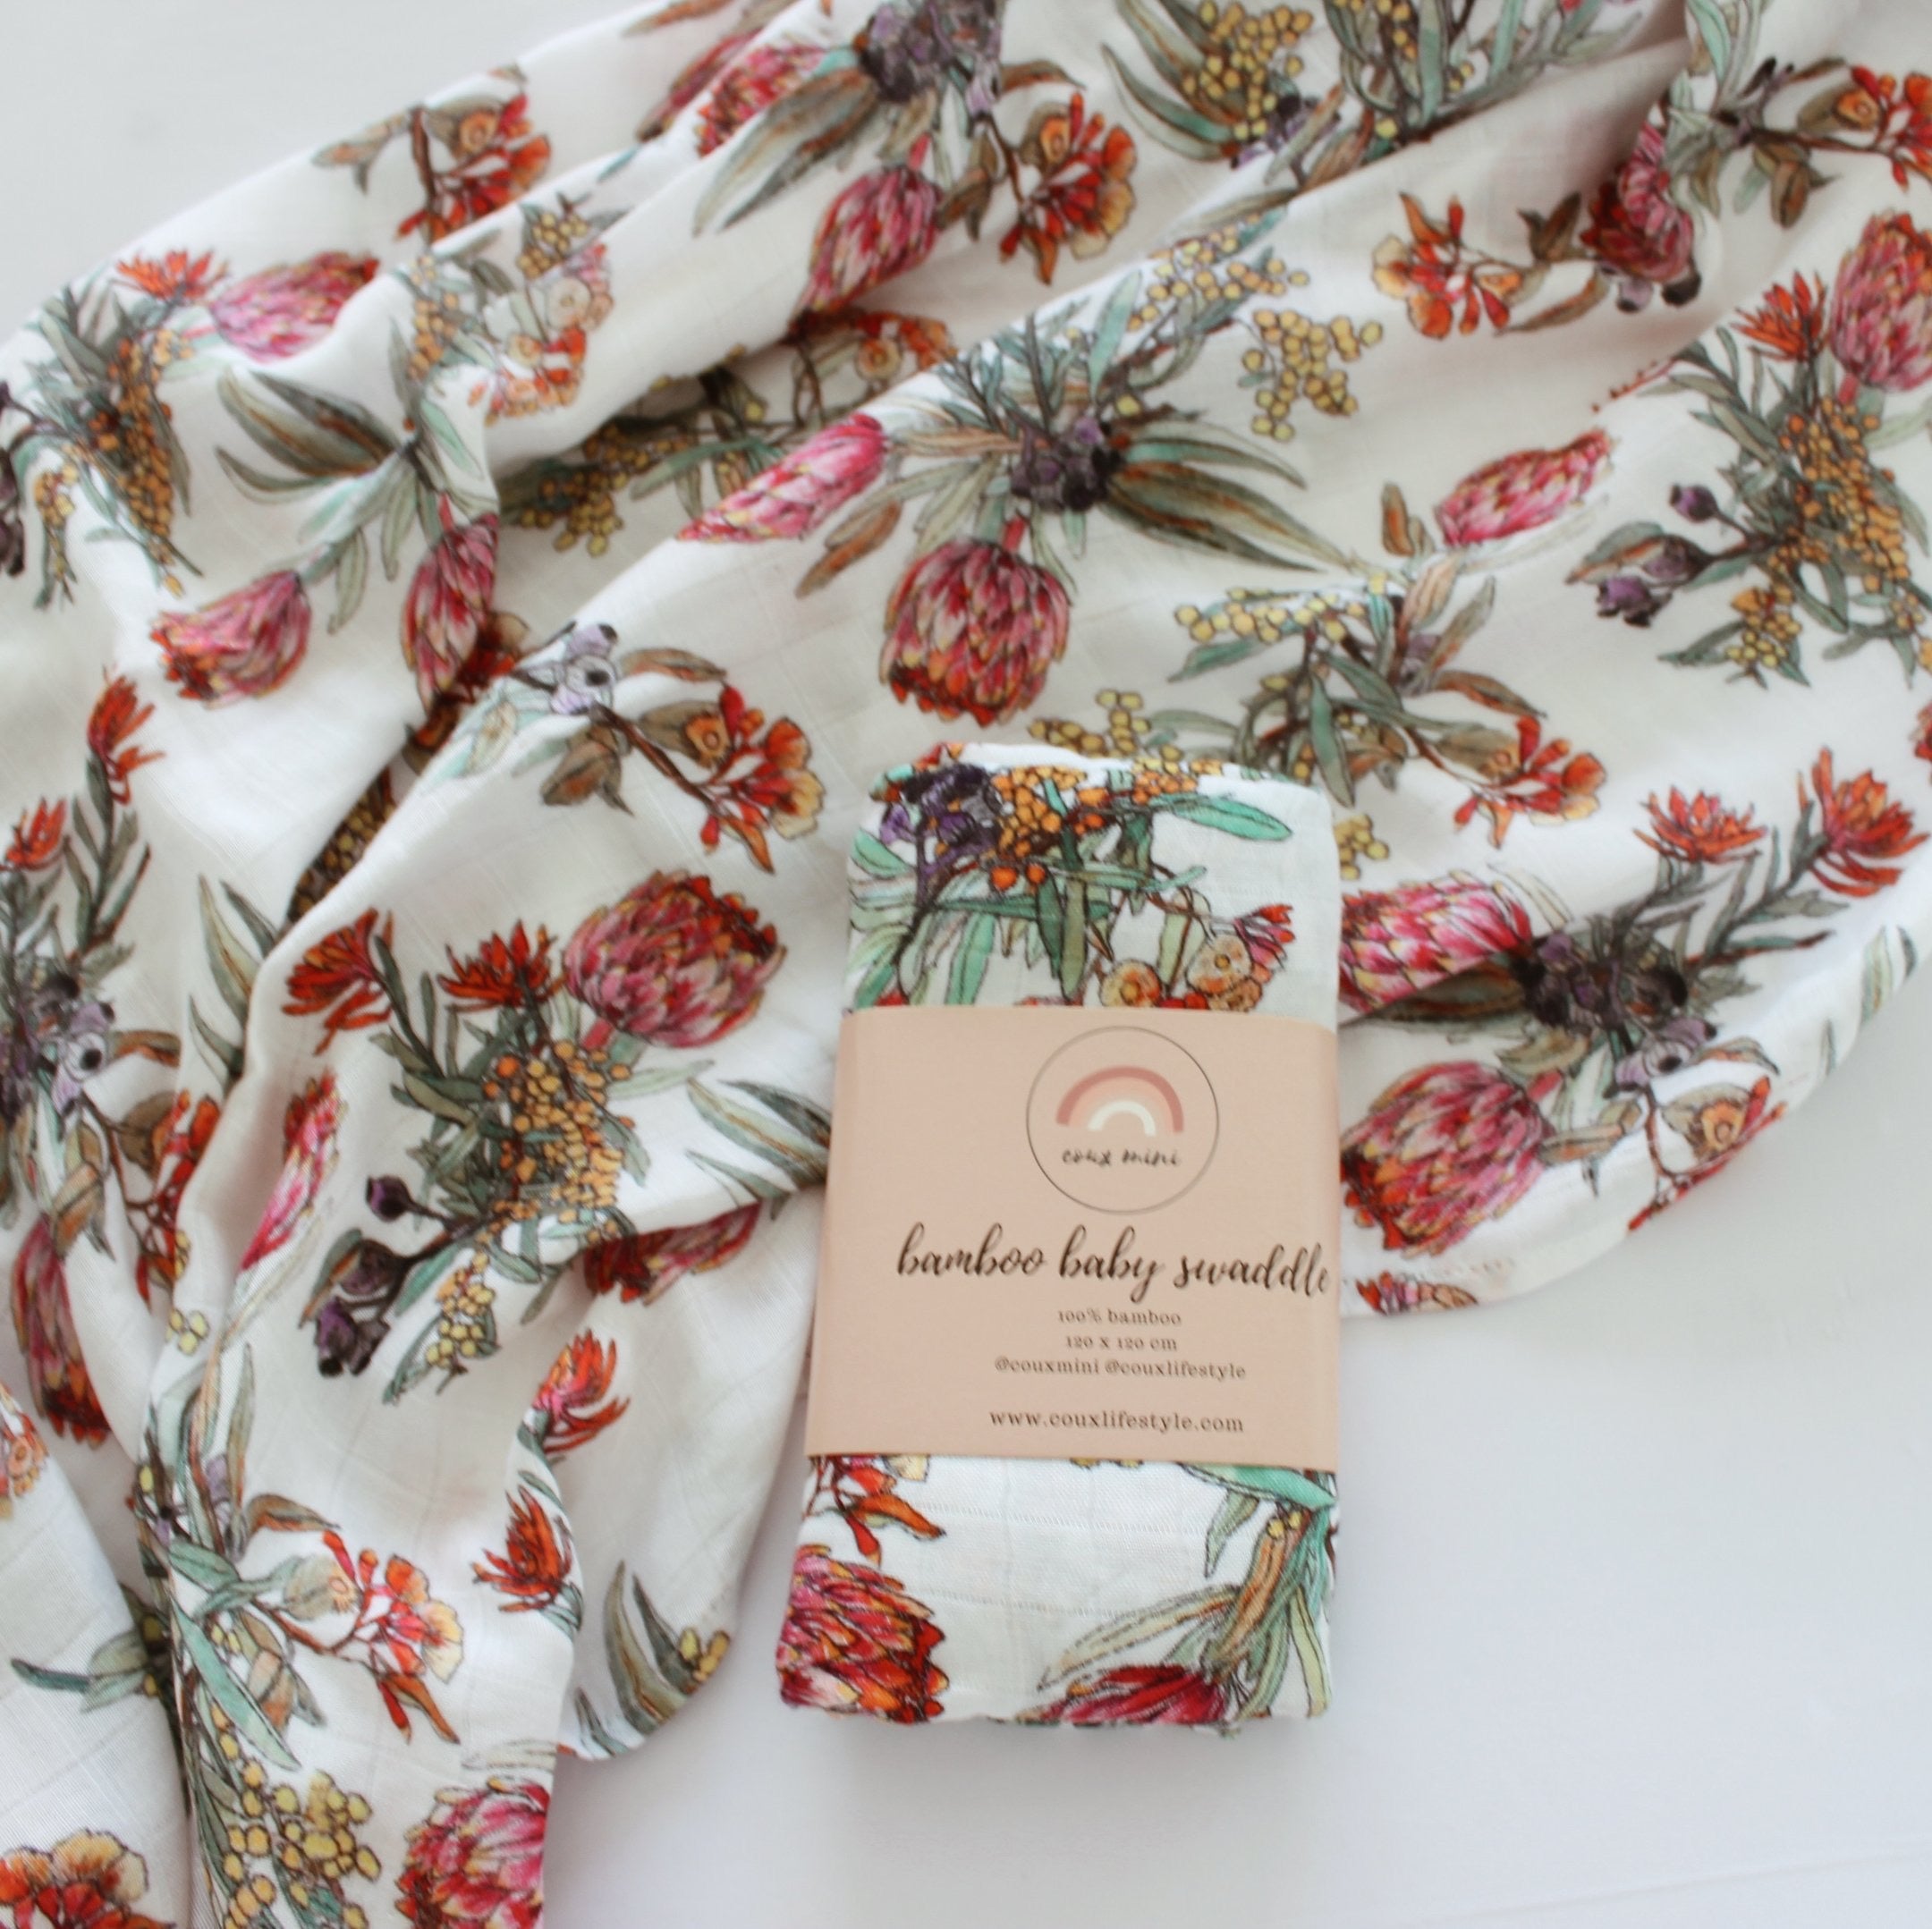 The Coux Wildflower Bamboo Muslin Wrap